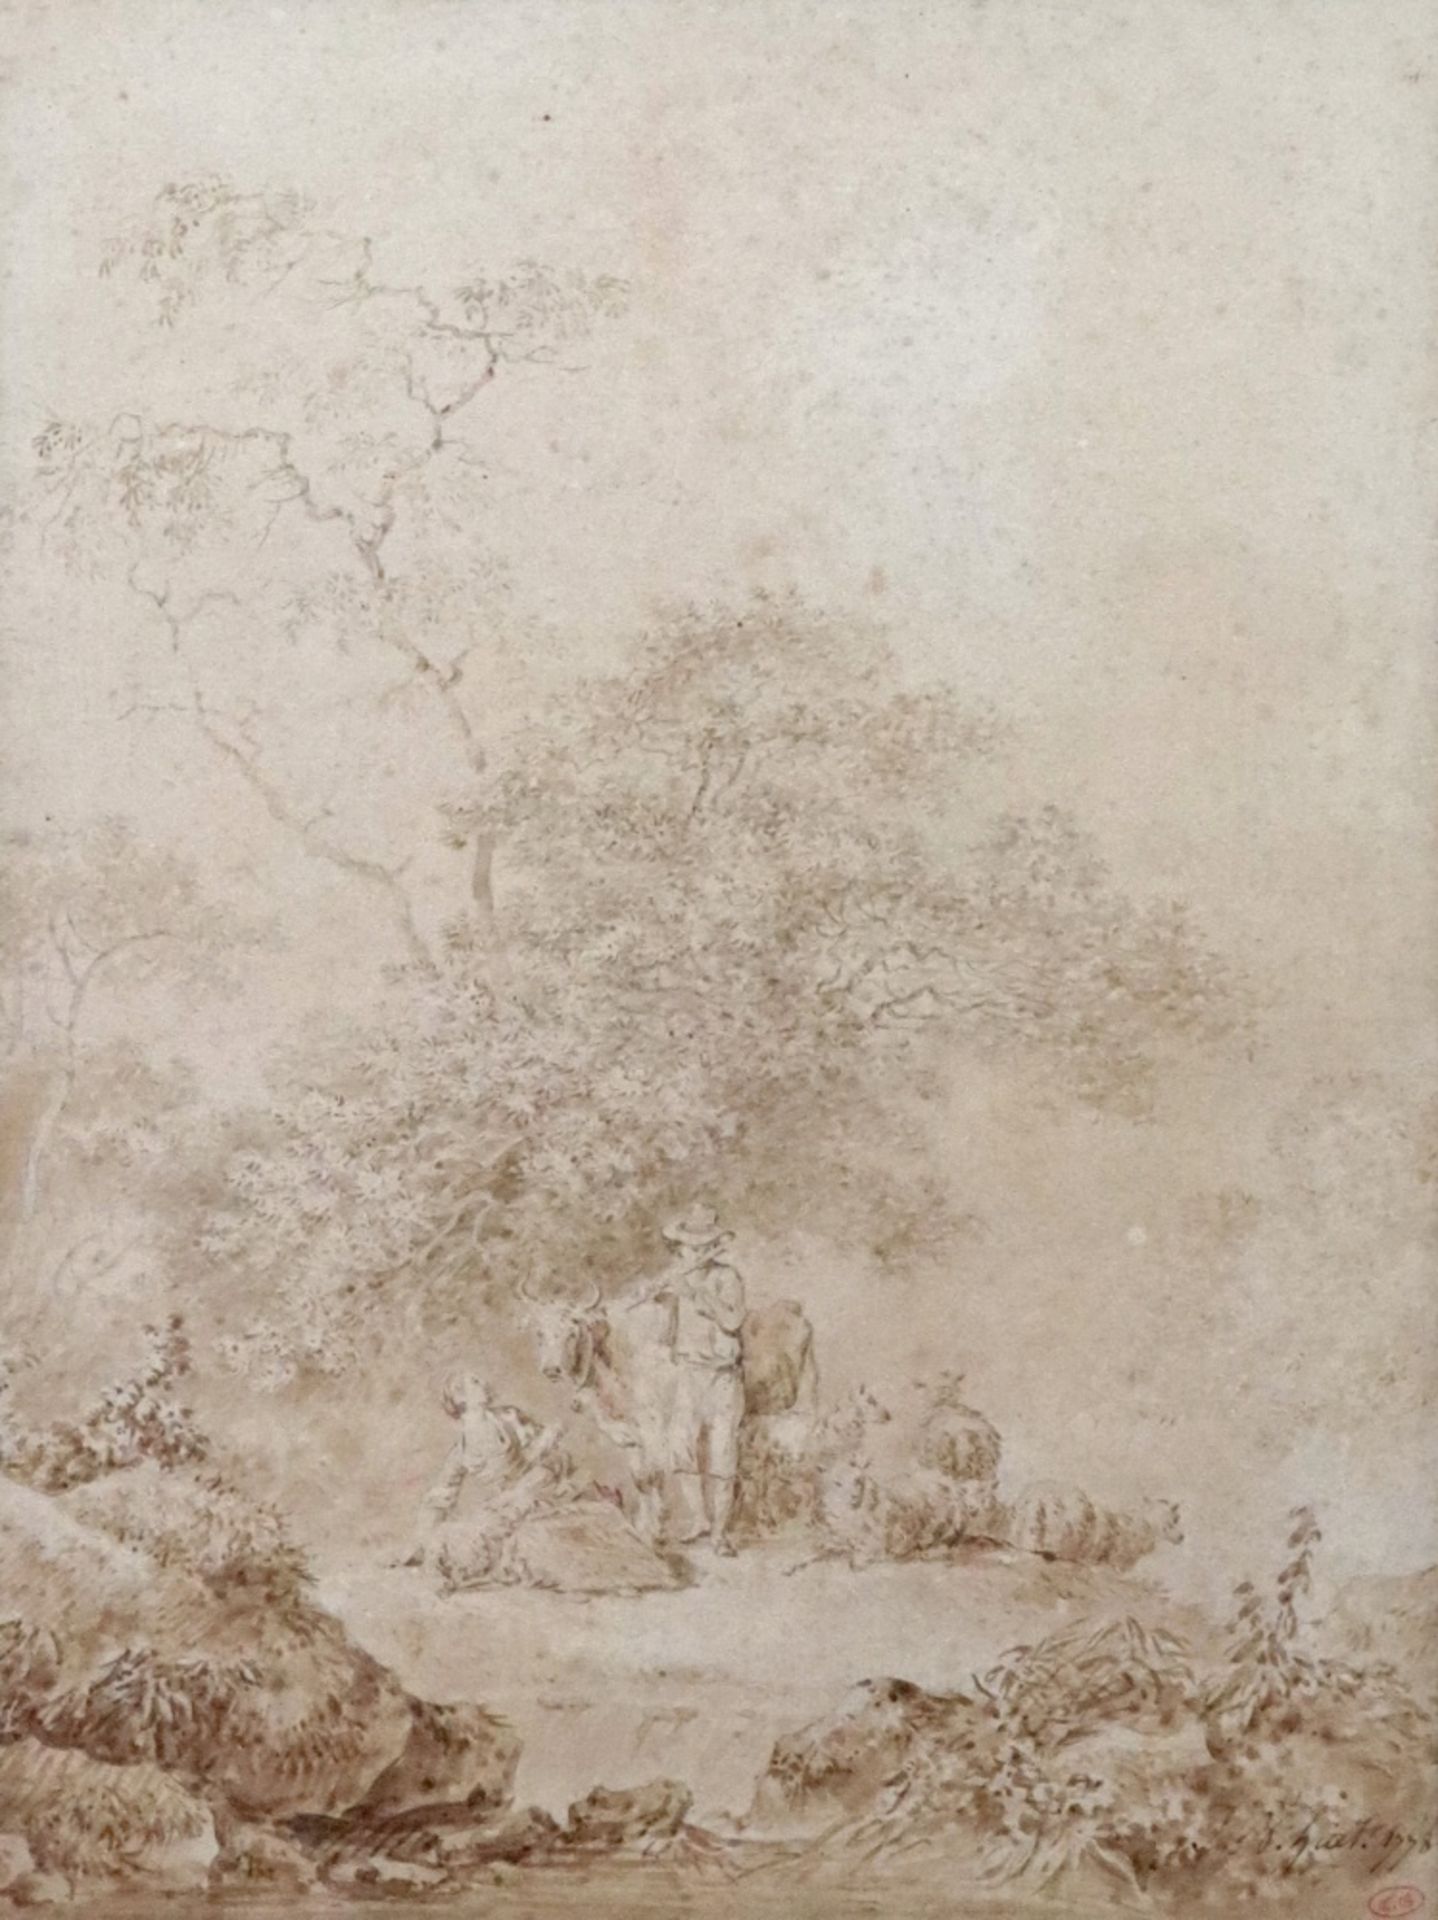 European School, 18th Century, A man playing the flute, with a woman and animals in a landscape,